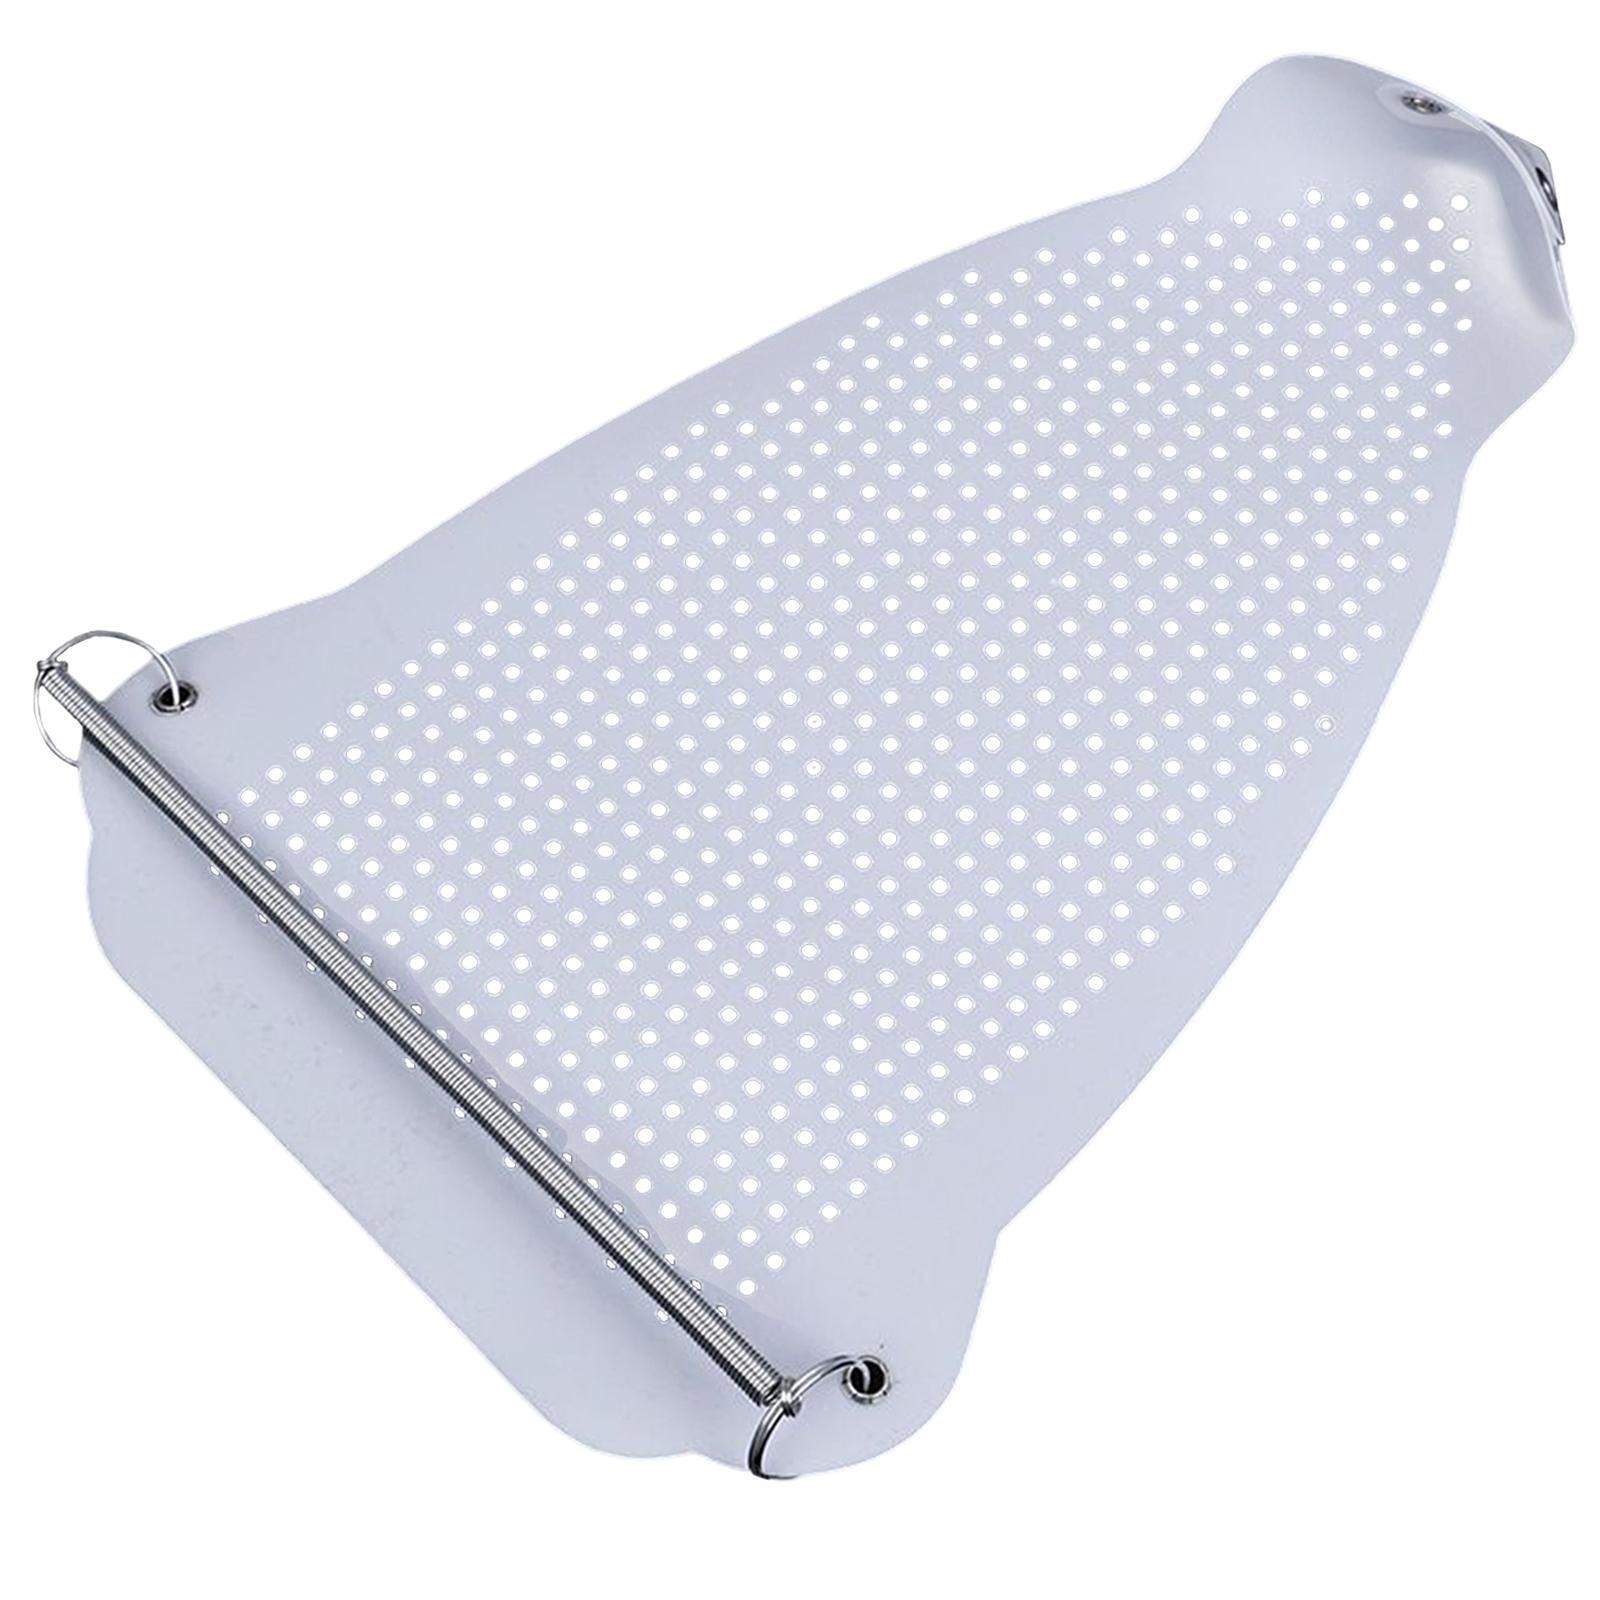 Iron Shoe Cover Ironing Accessories Iron Auxiliary Tool Soleplate